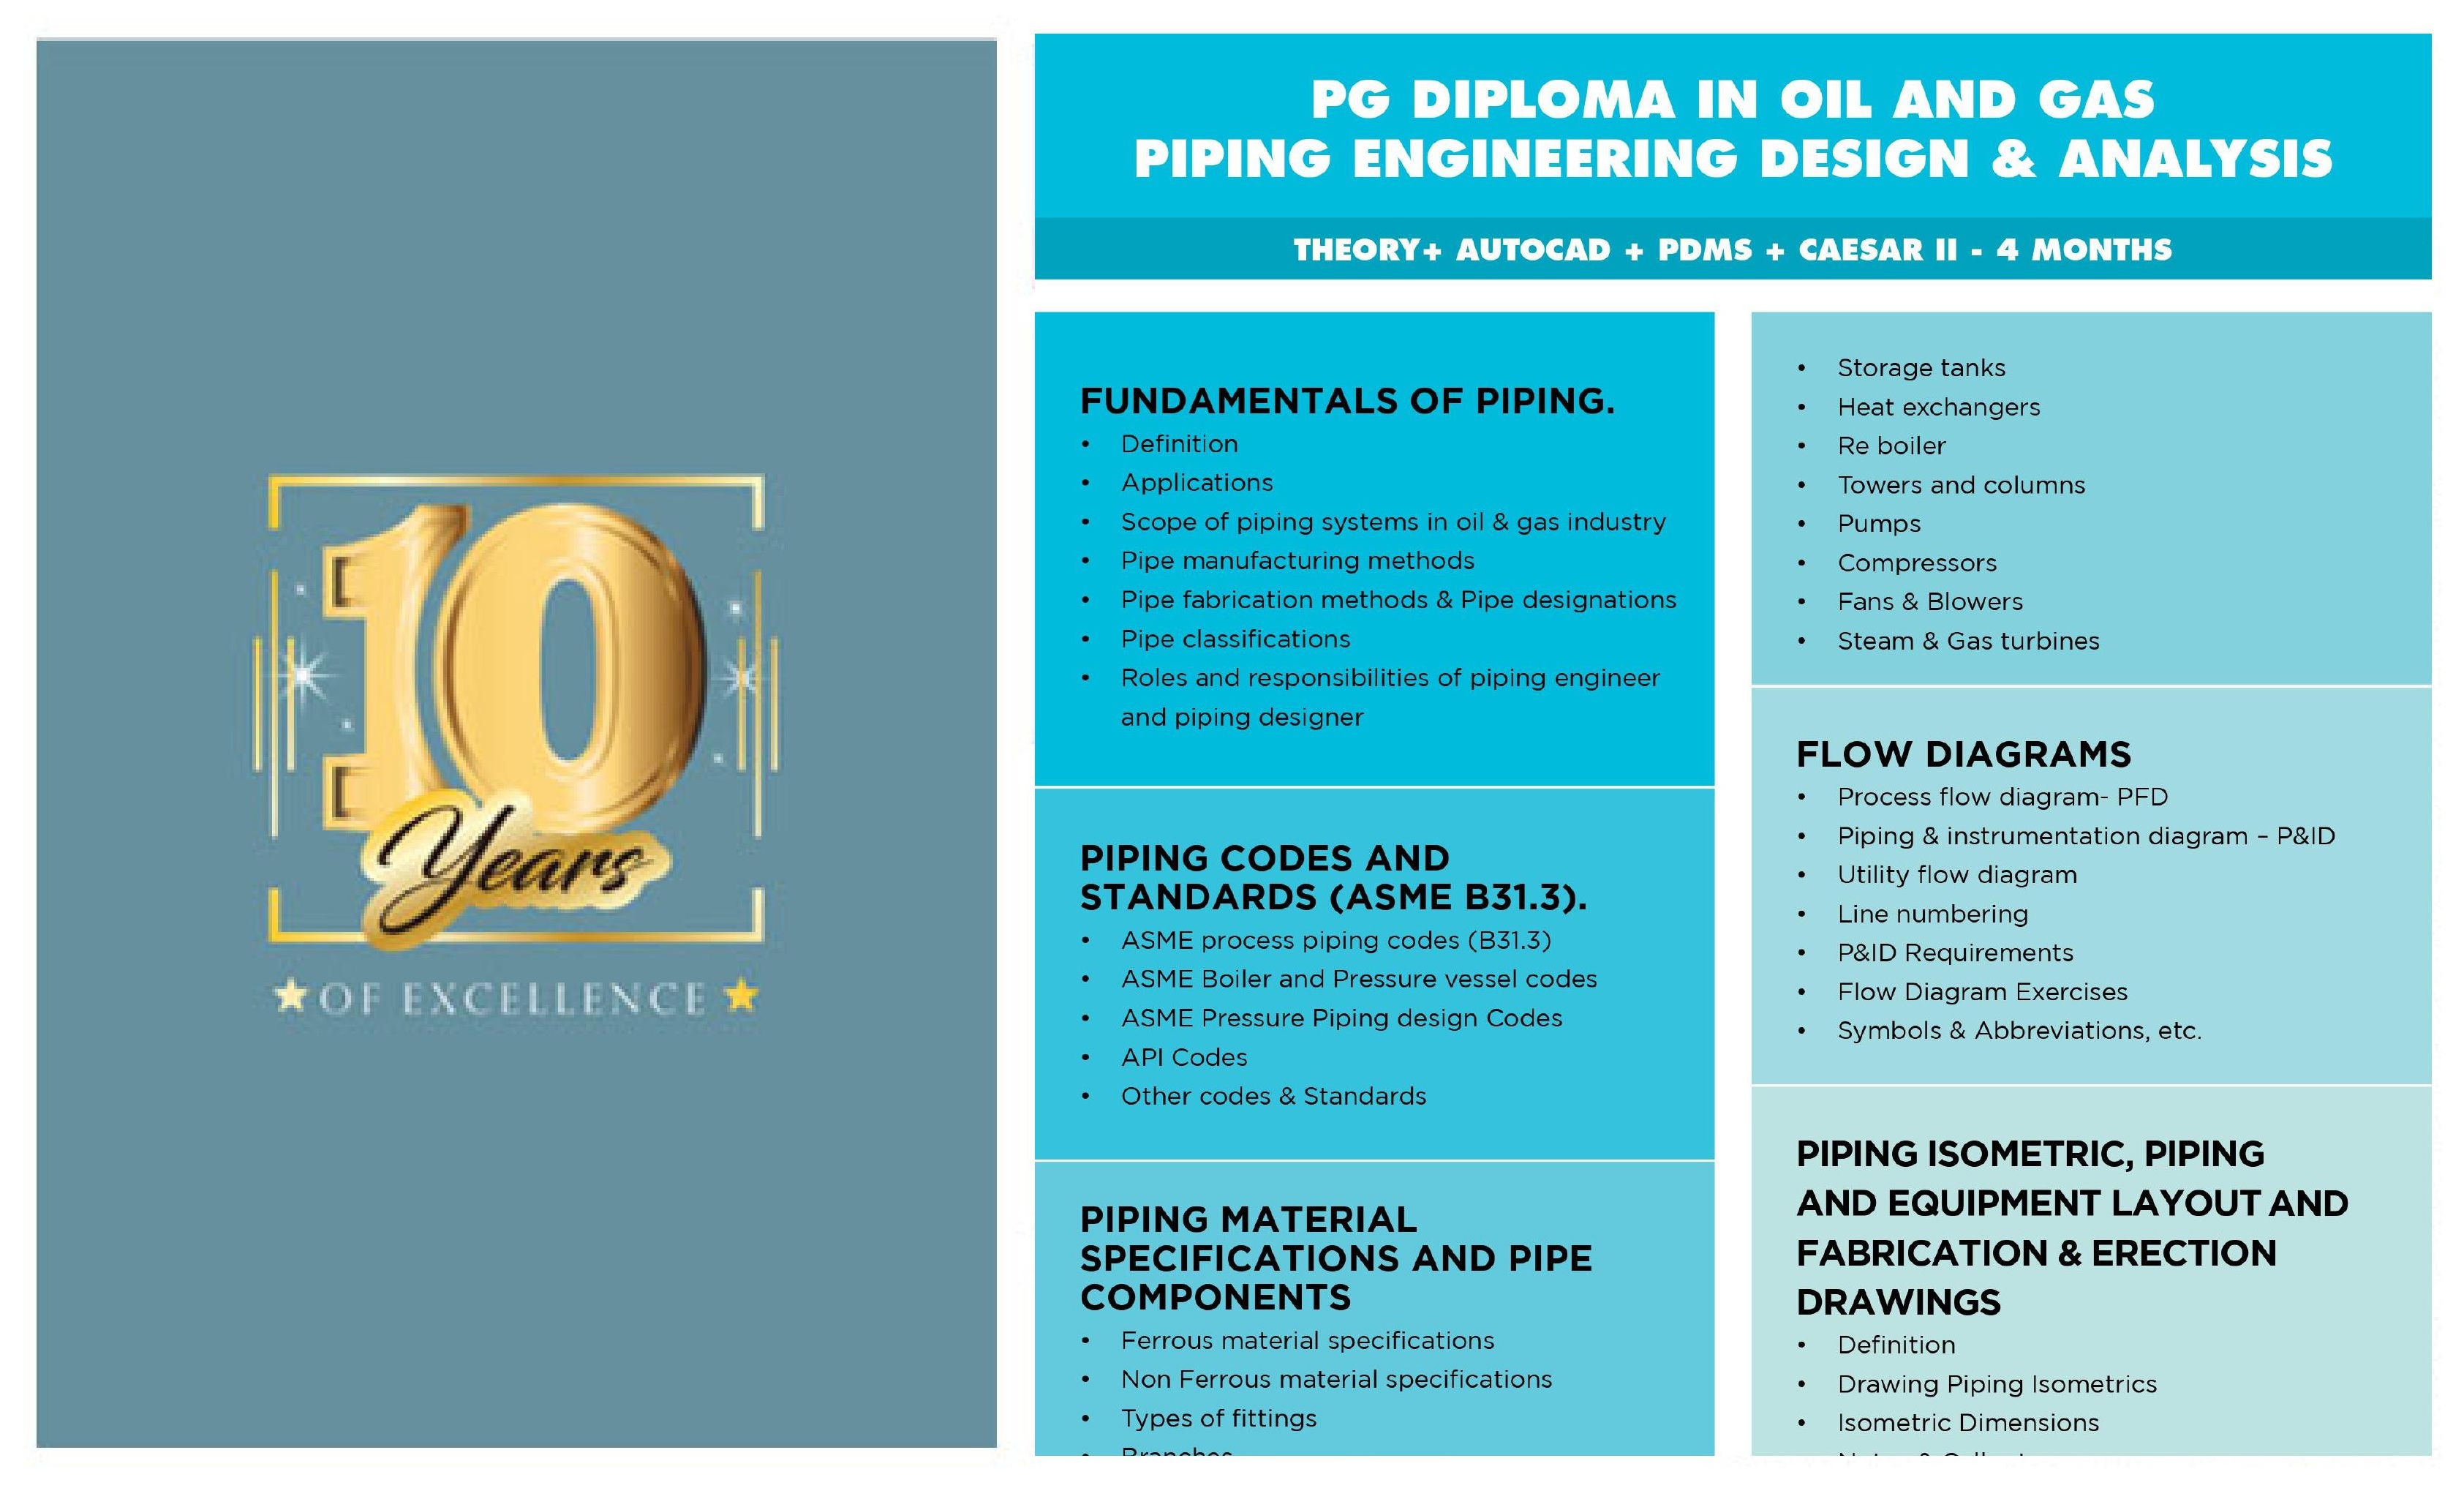 PG Diploma in Oil and Gas Piping Engineering Design & Analysis syllabus